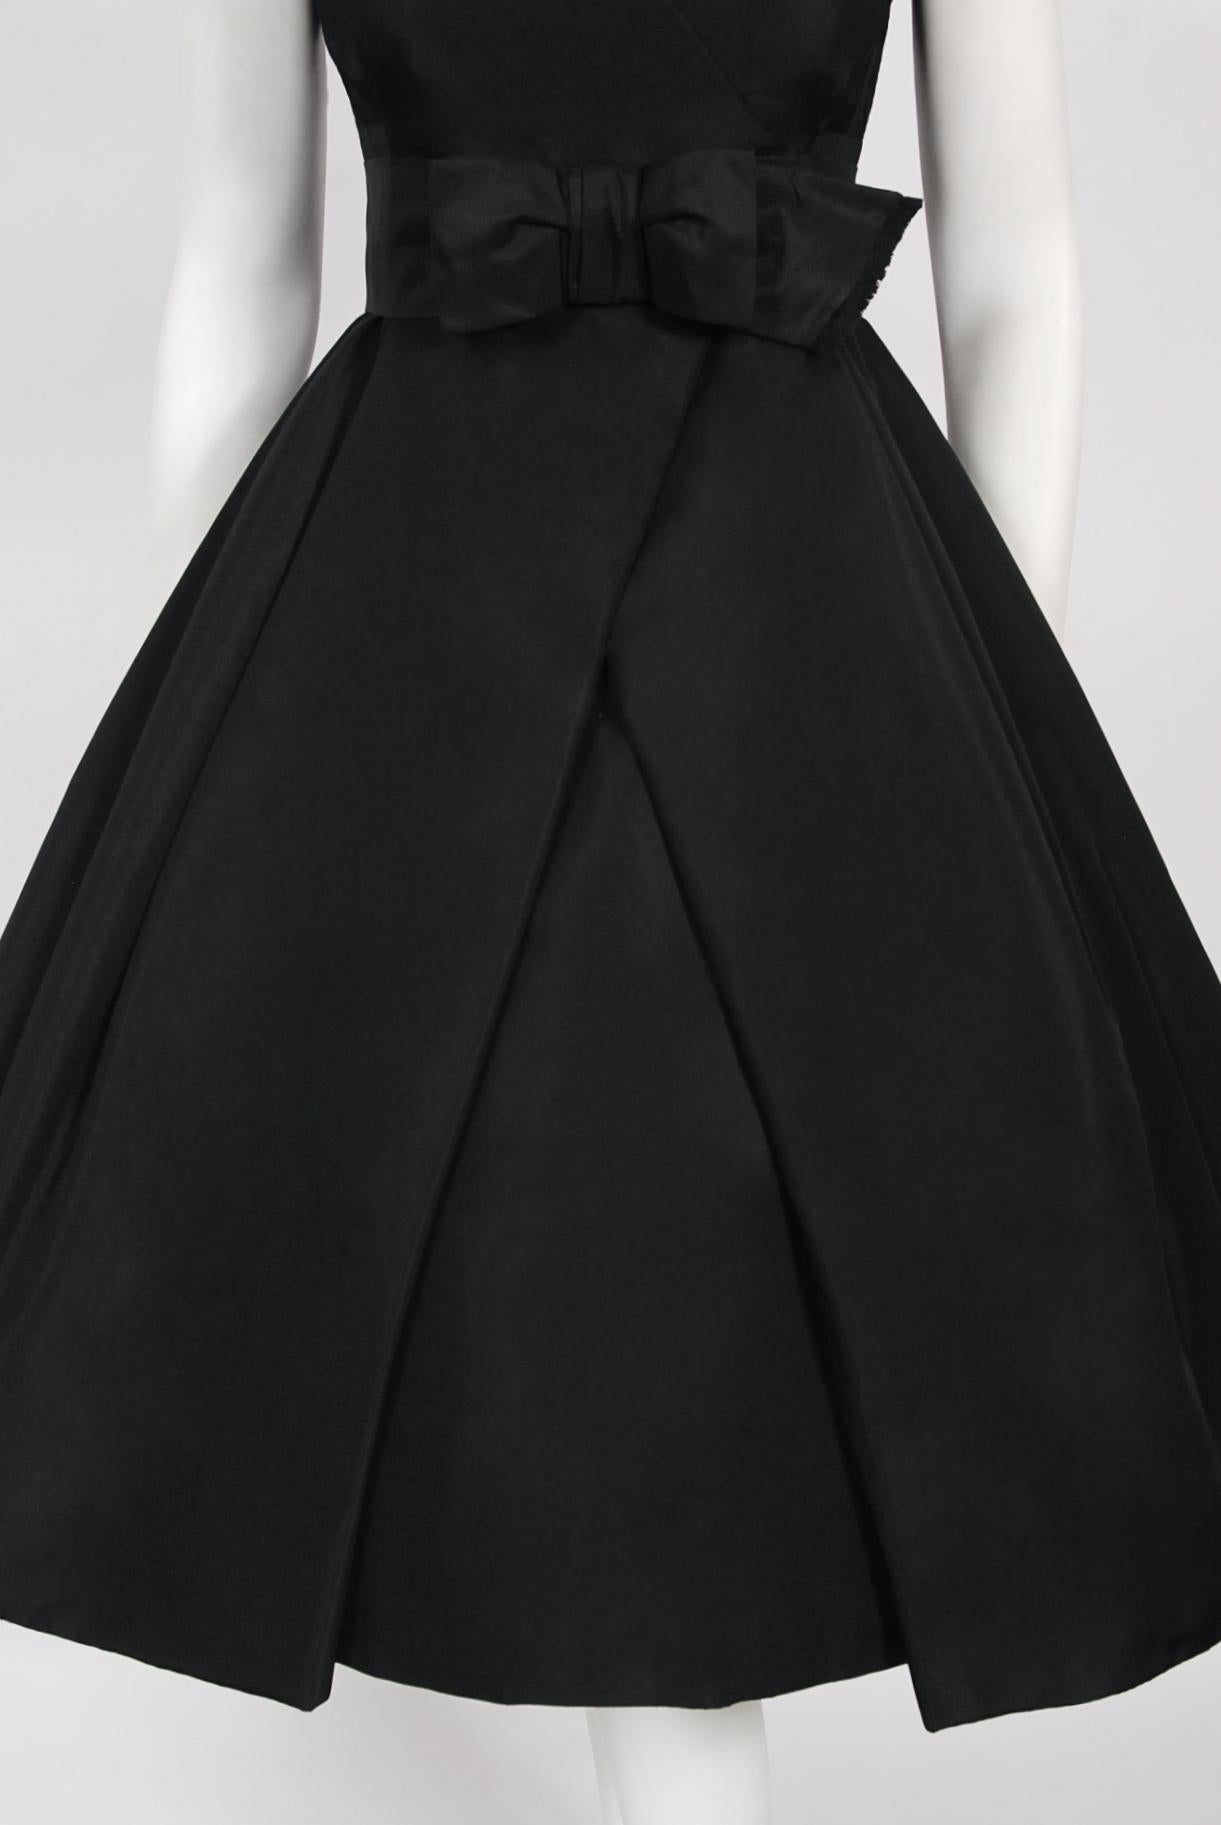 Vintage 1956 Christian Dior Haute Couture Documented Black Silk 'New Look' Dress 3